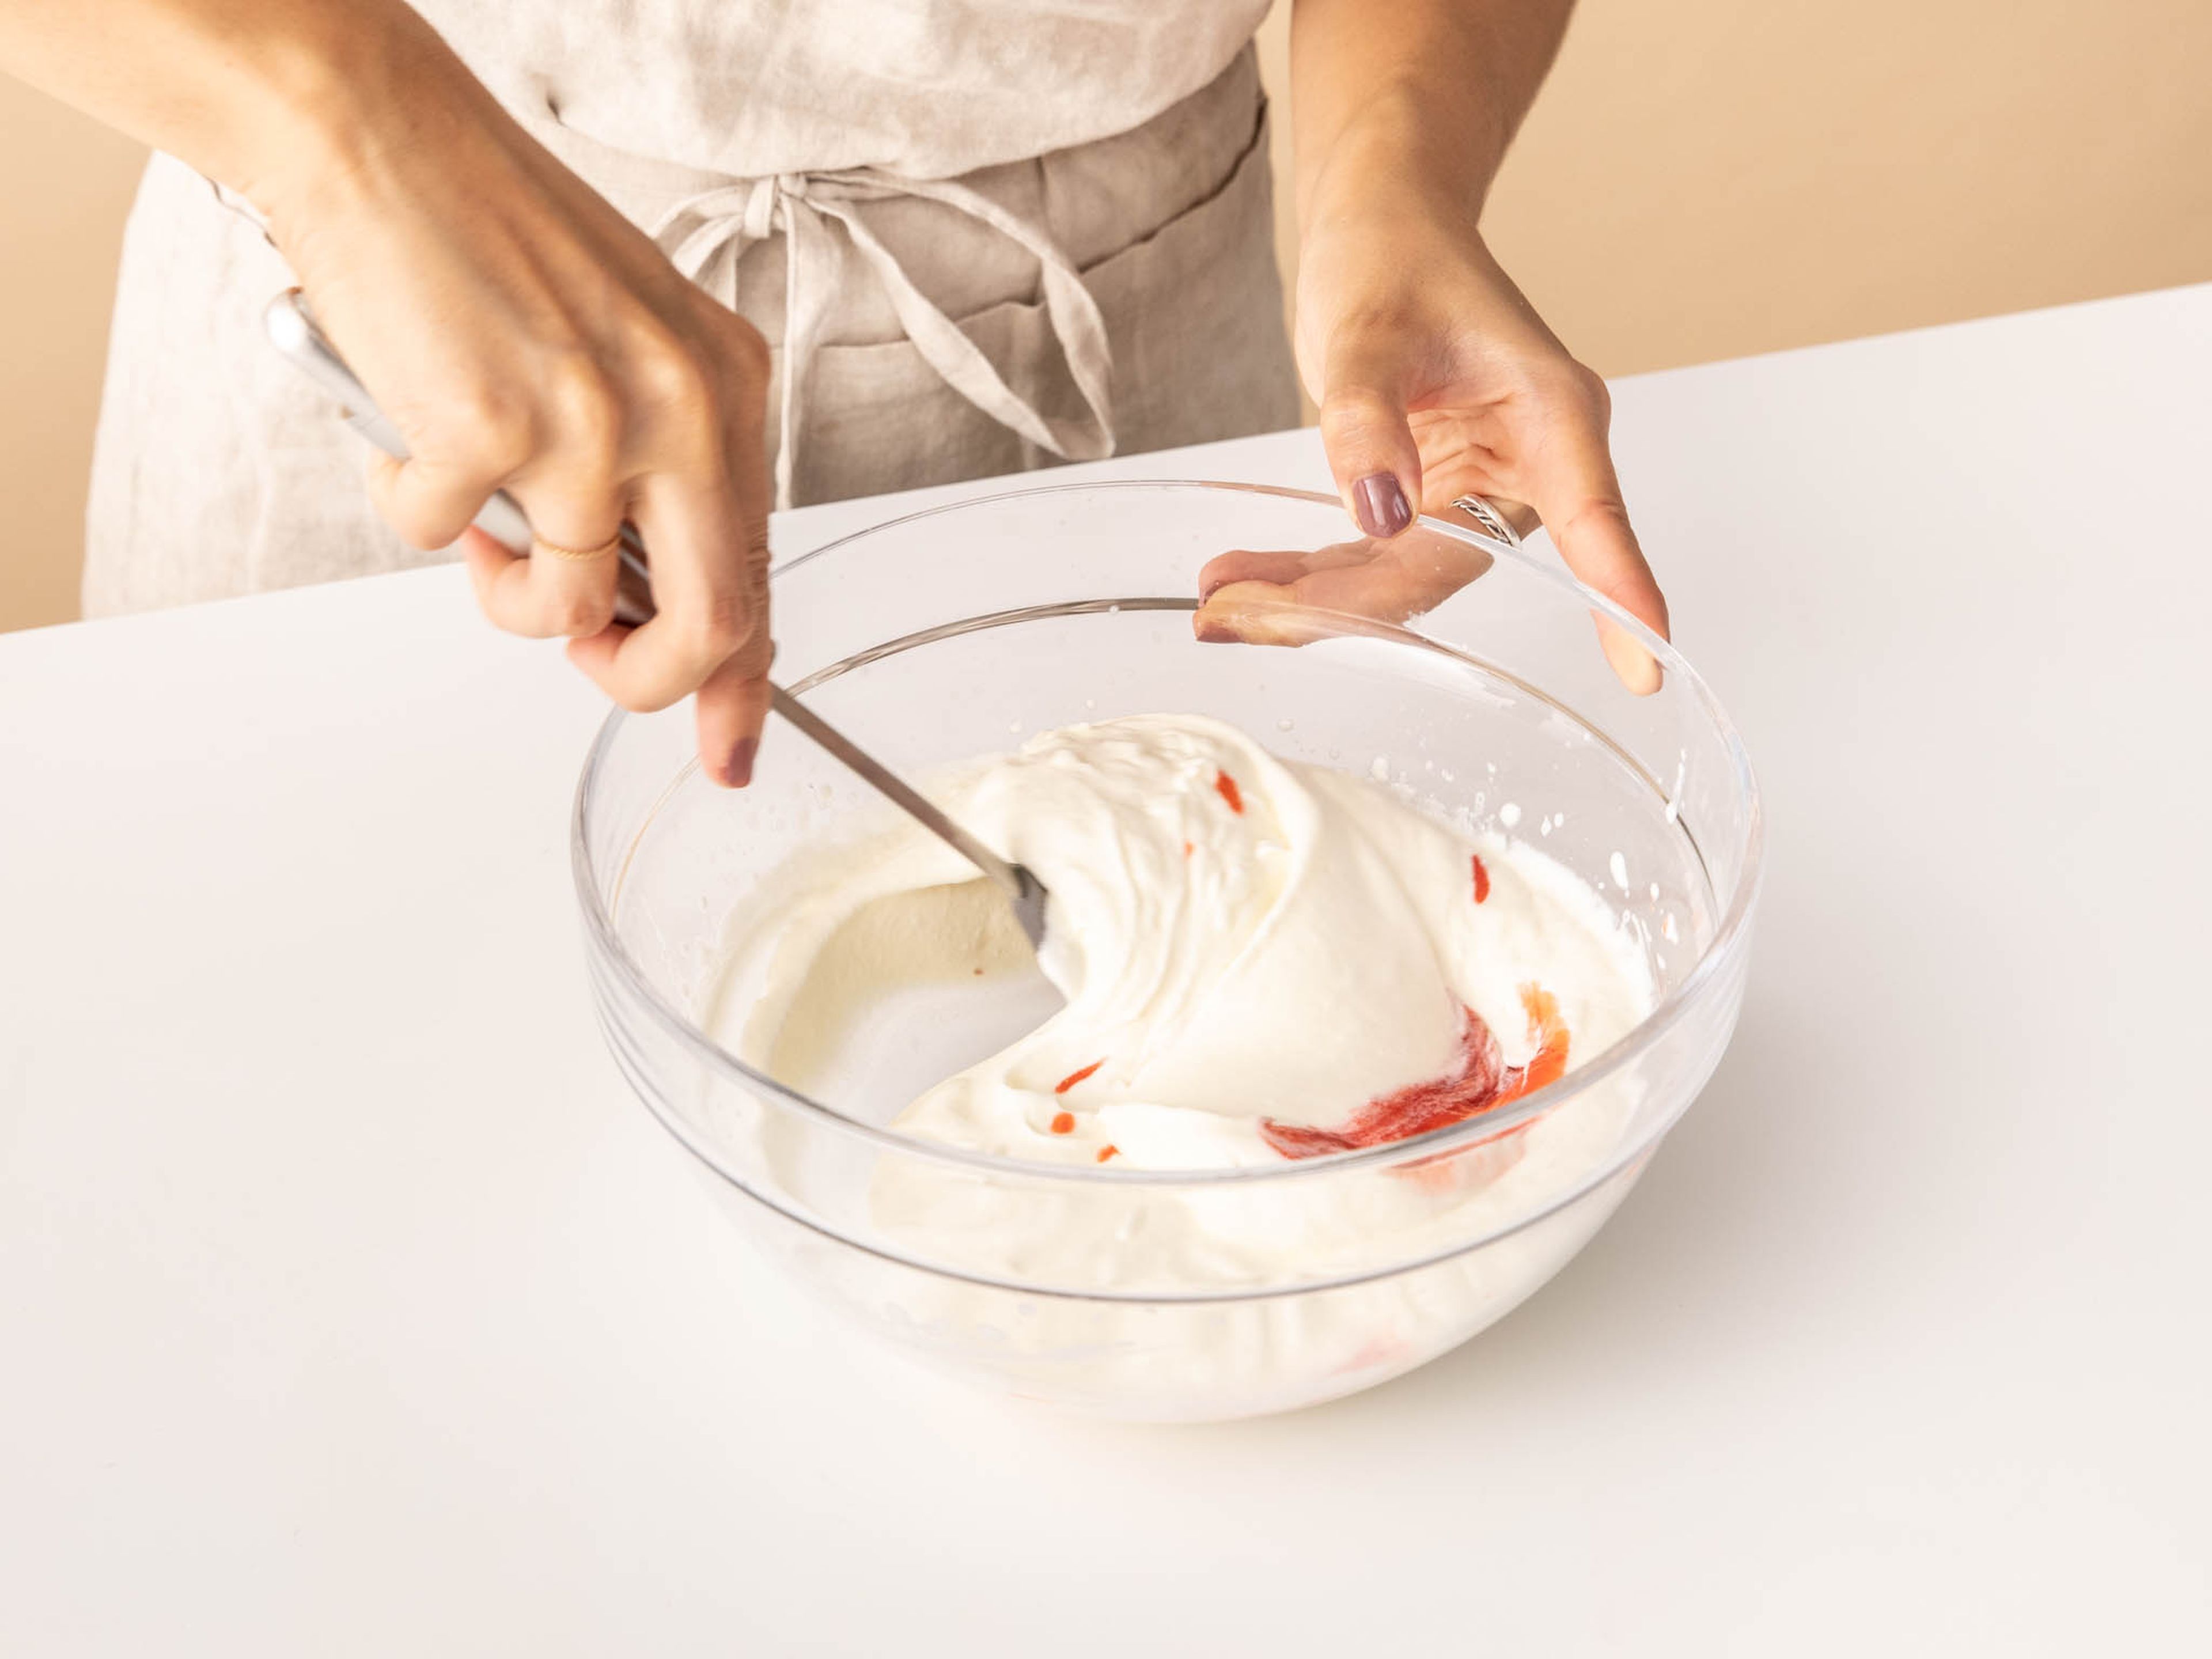 Whip the cream to stiff peaks with remaining sugar. Very gently mix together the strawberry purée and whipped cream just until streaks of the purée are visible.